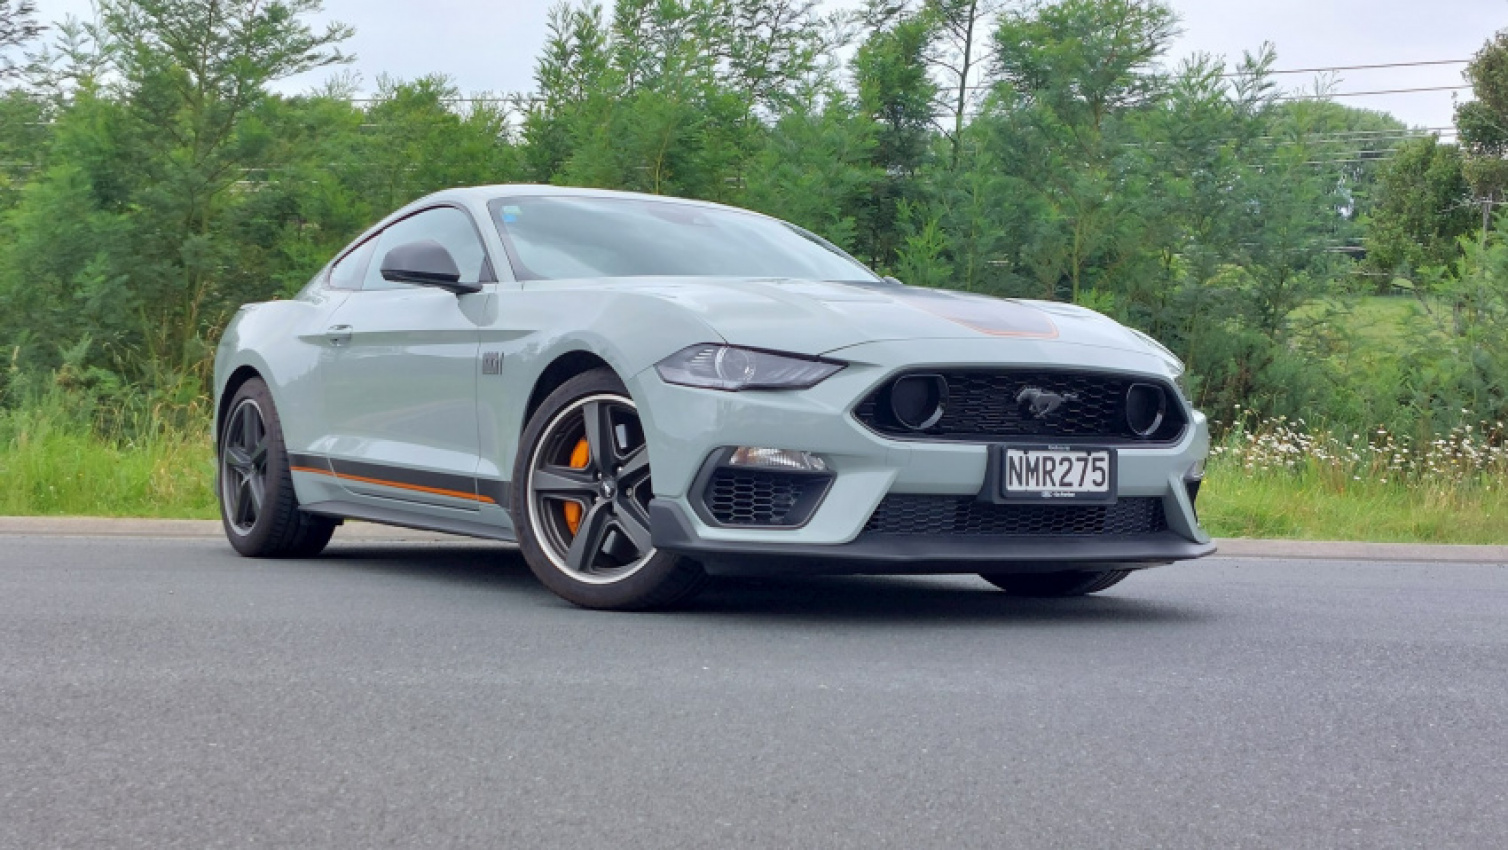 autos, cars, ford, reviews, shelby, automotive industry, car, cars, driven, driven nz, ford mustang, ford mustang mach 1 review: bit shelby spice, motoring, national, new zealand, news, nz, road tests, ford mustang mach 1 review: a bit of shelby spice